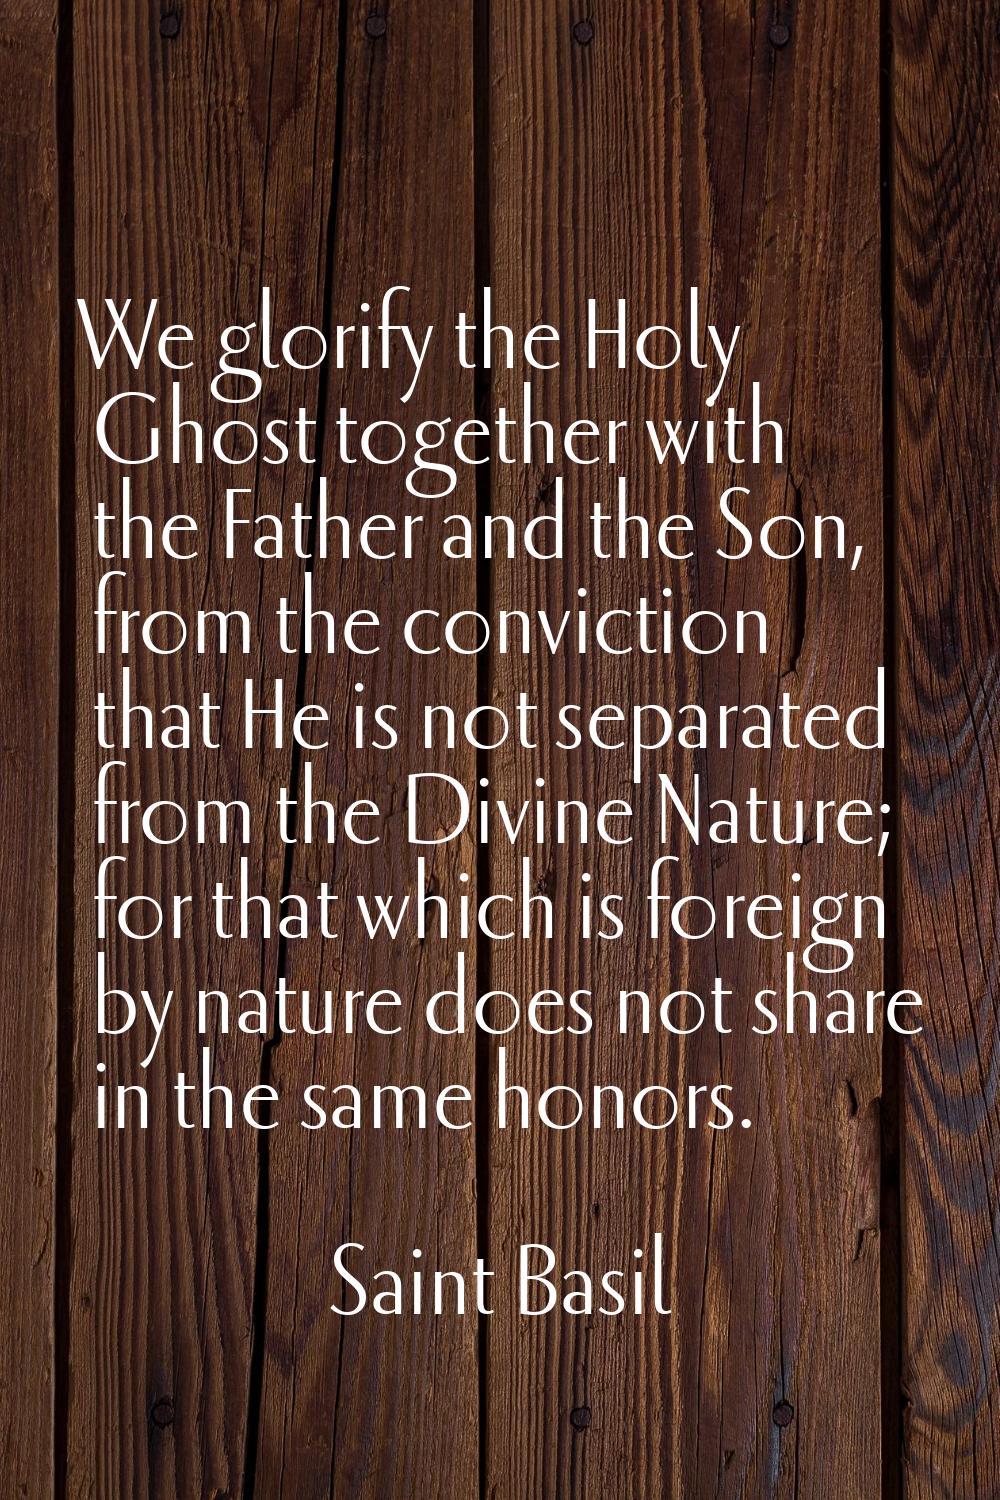 We glorify the Holy Ghost together with the Father and the Son, from the conviction that He is not 